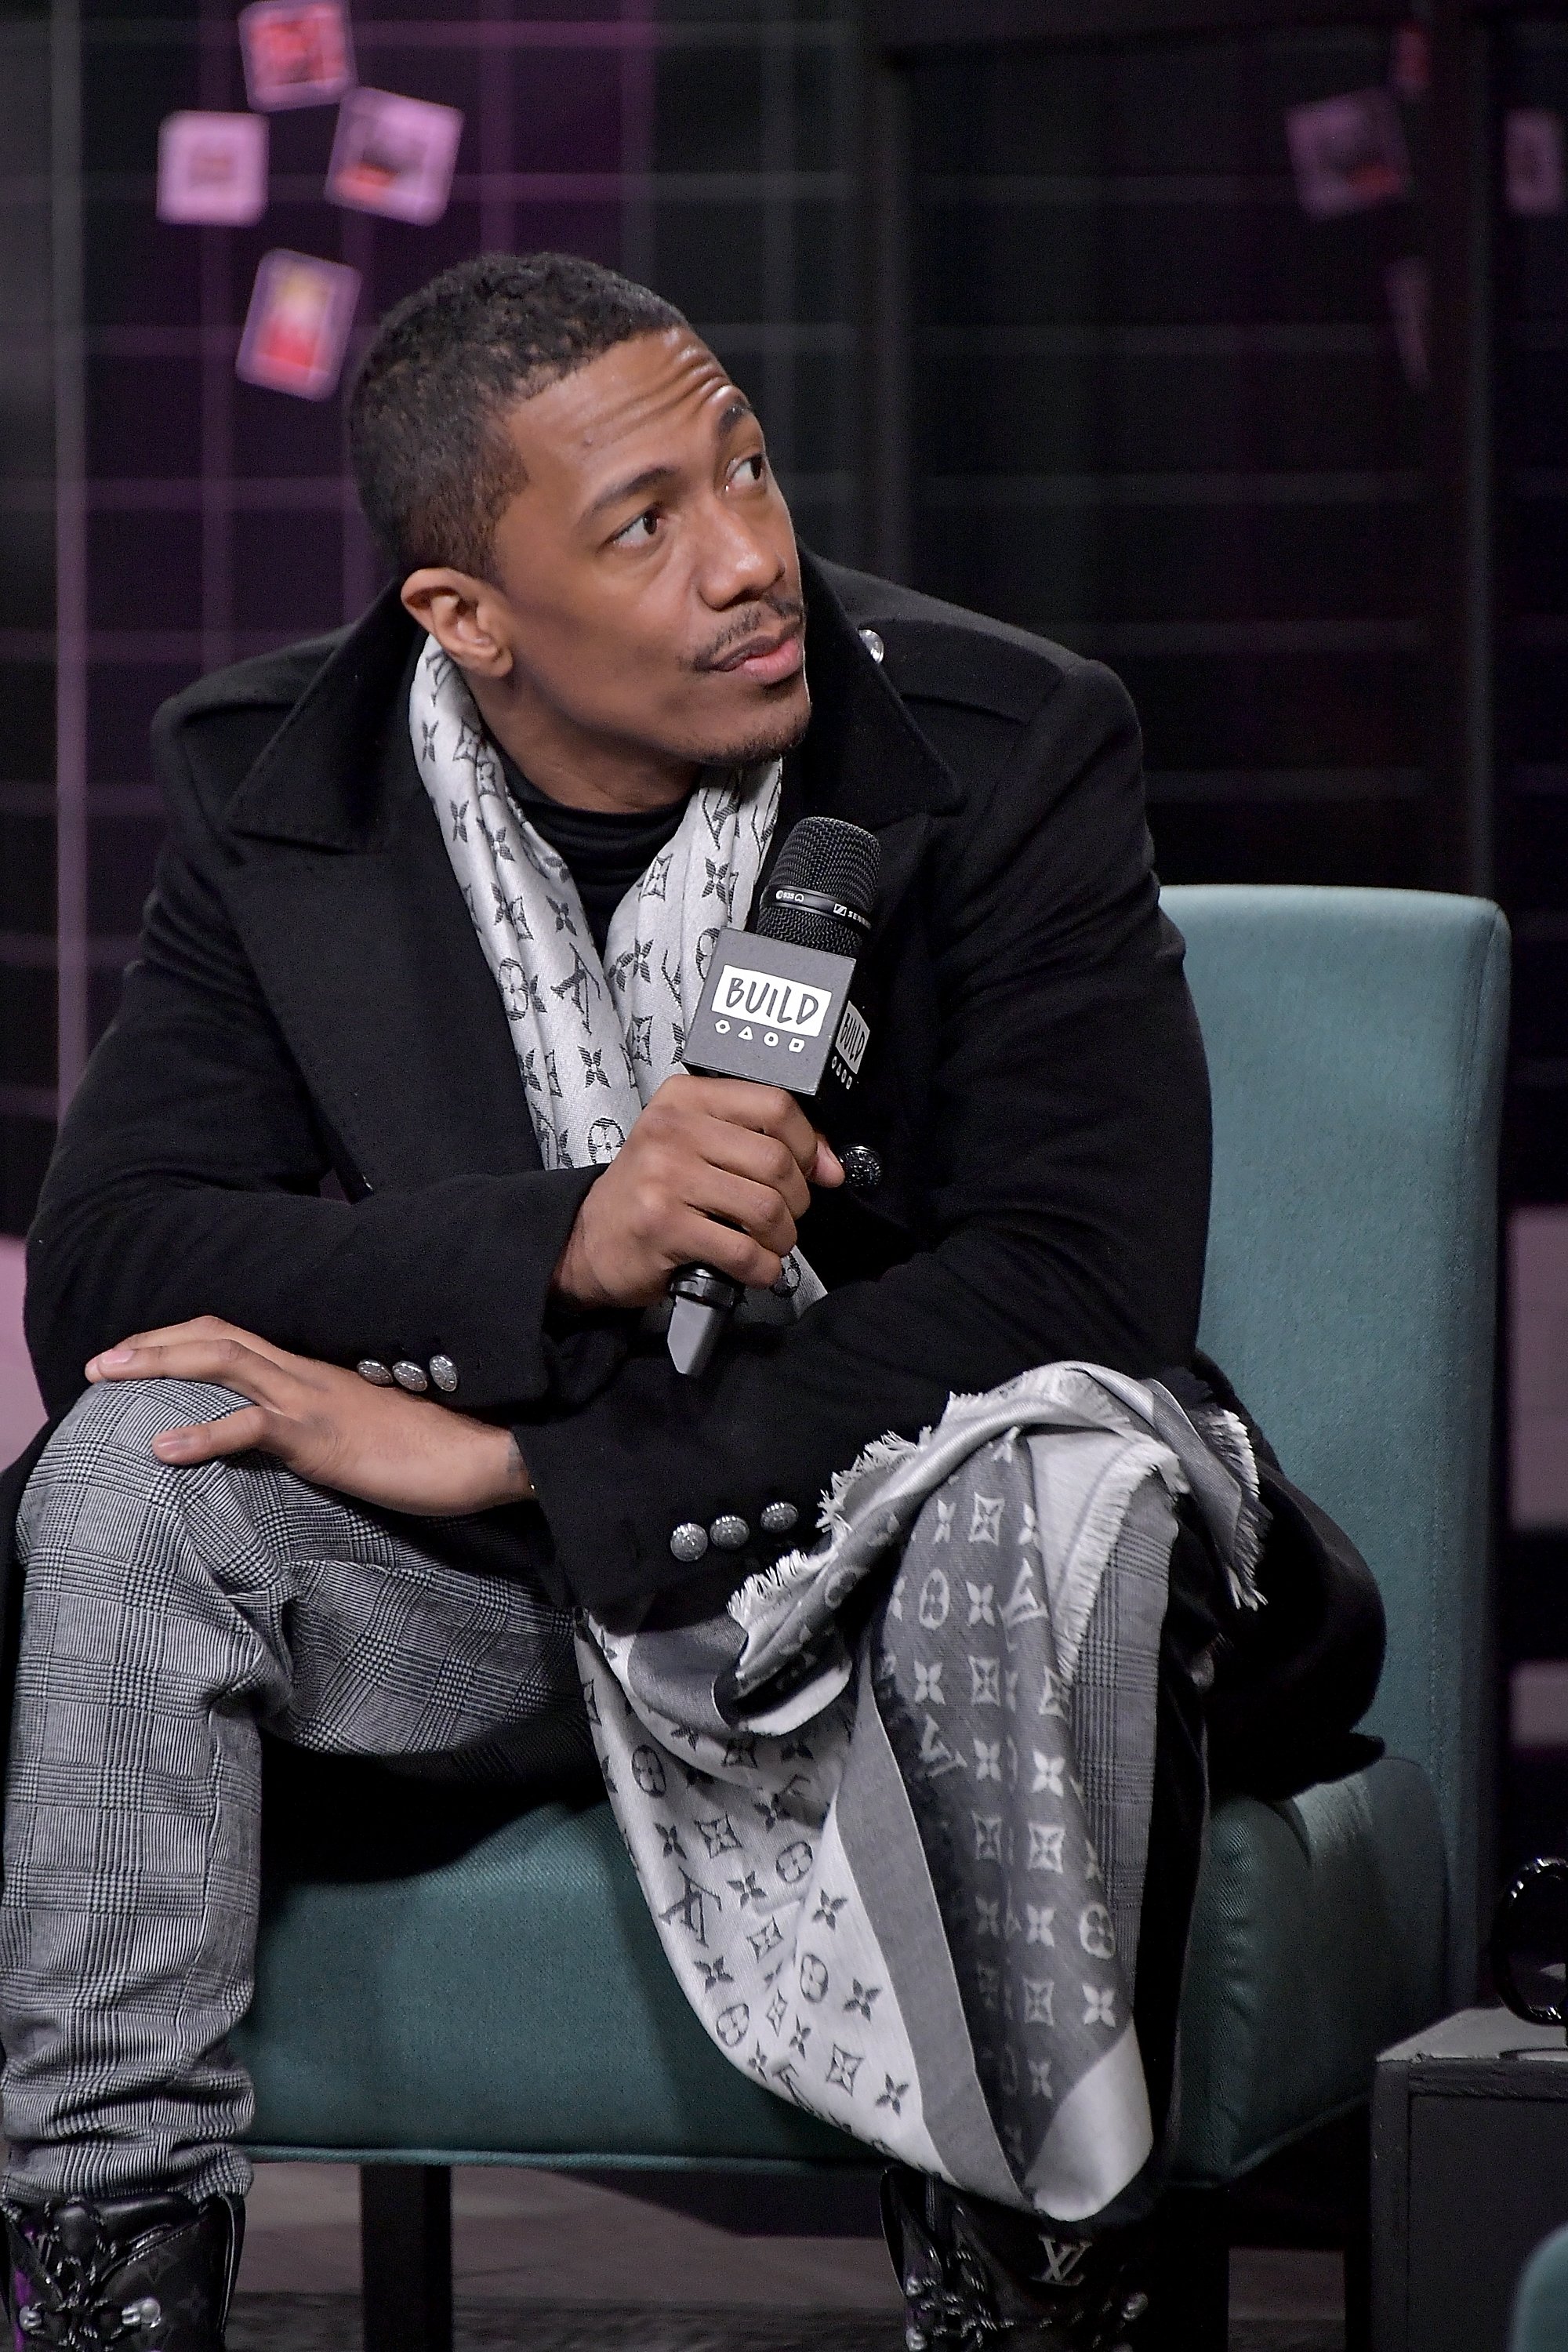 Nick Cannon at Build Studio to discuss his reality show, "The Masked Singer" on Dec. 11, 2018 in New York City | Photo: Getty Images